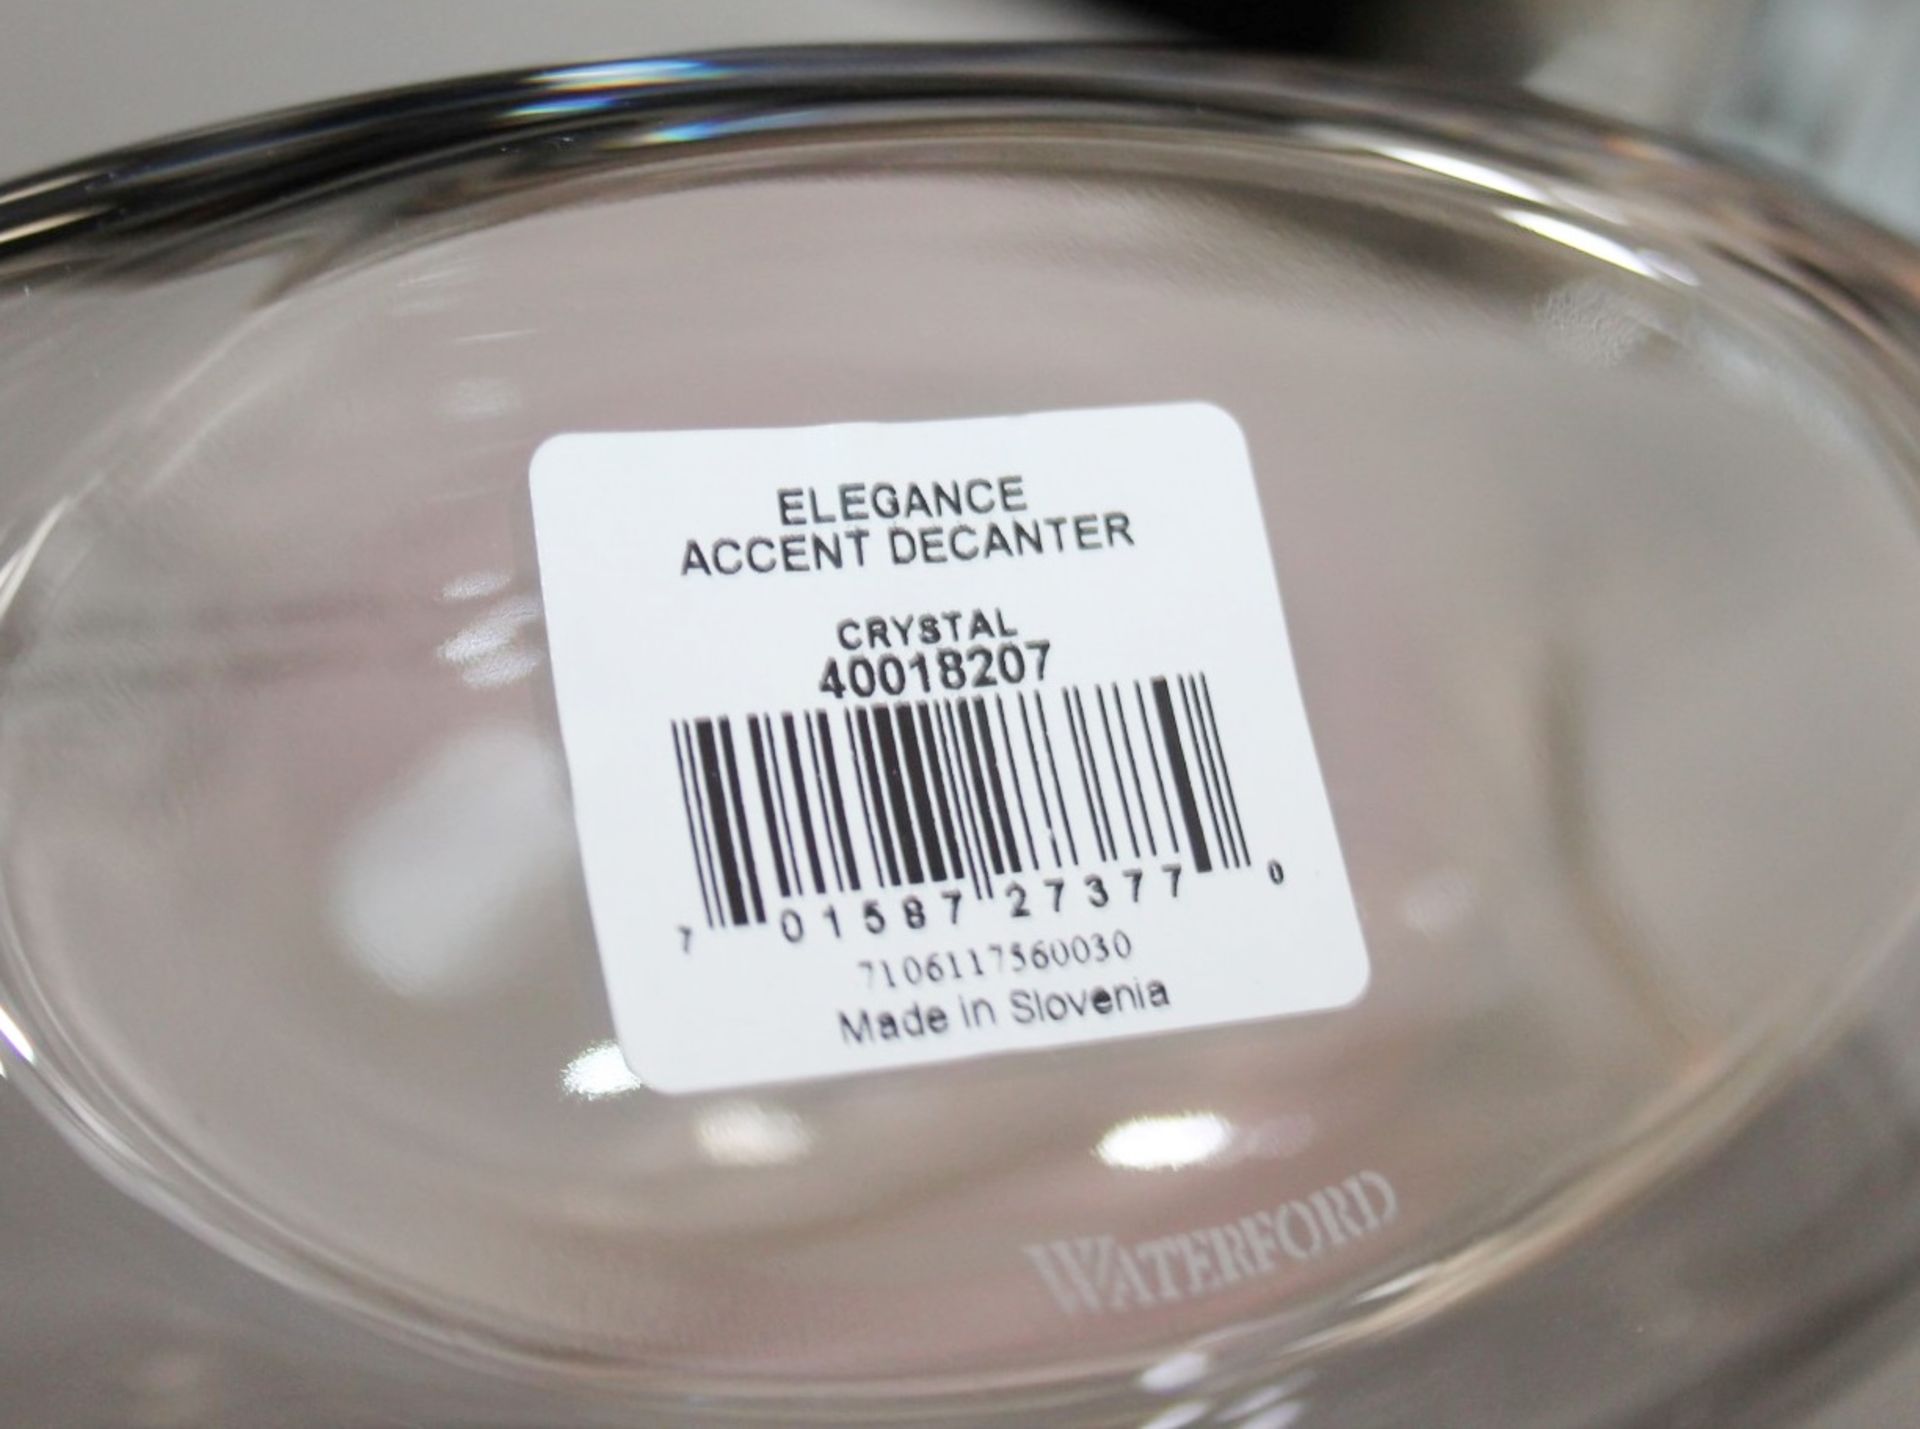 1 x WATERFORD CRYSTAL 'Elegance' Accent Decanter (1L) - Original Price £195.00 - Unused Boxed - Image 4 of 8